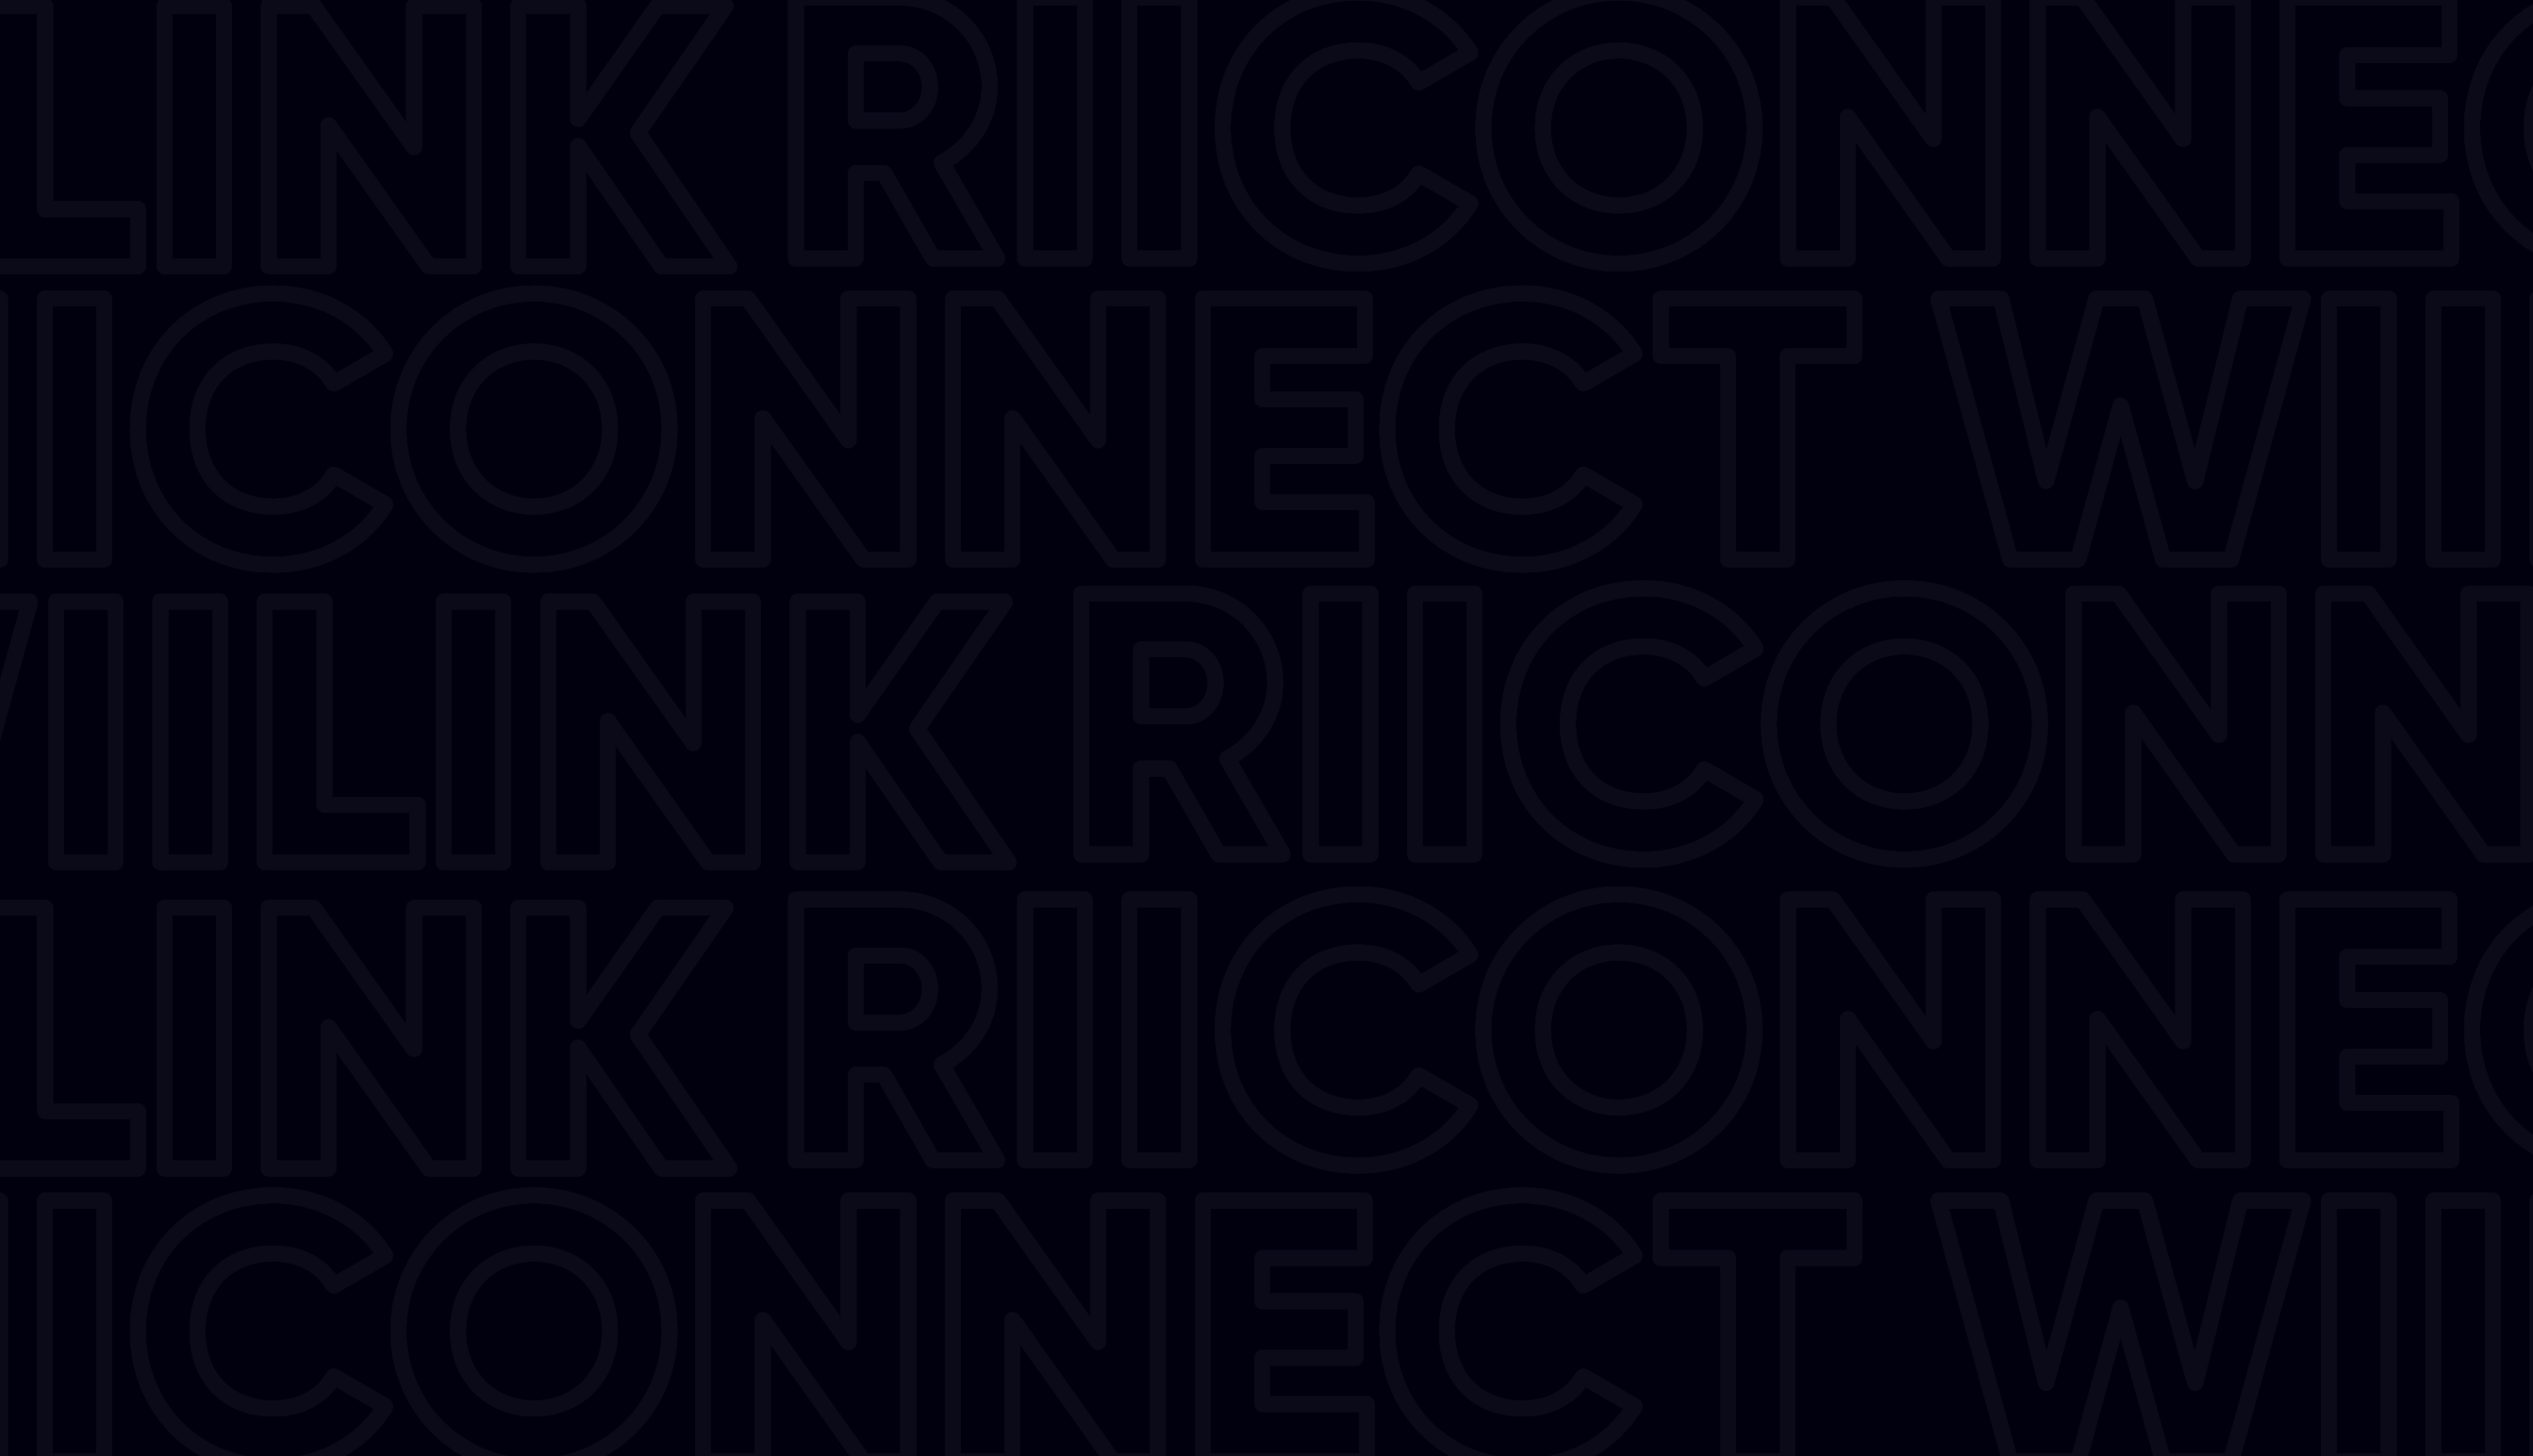 Dark background with the words 'WiiLink' and 'RiiConnect24'